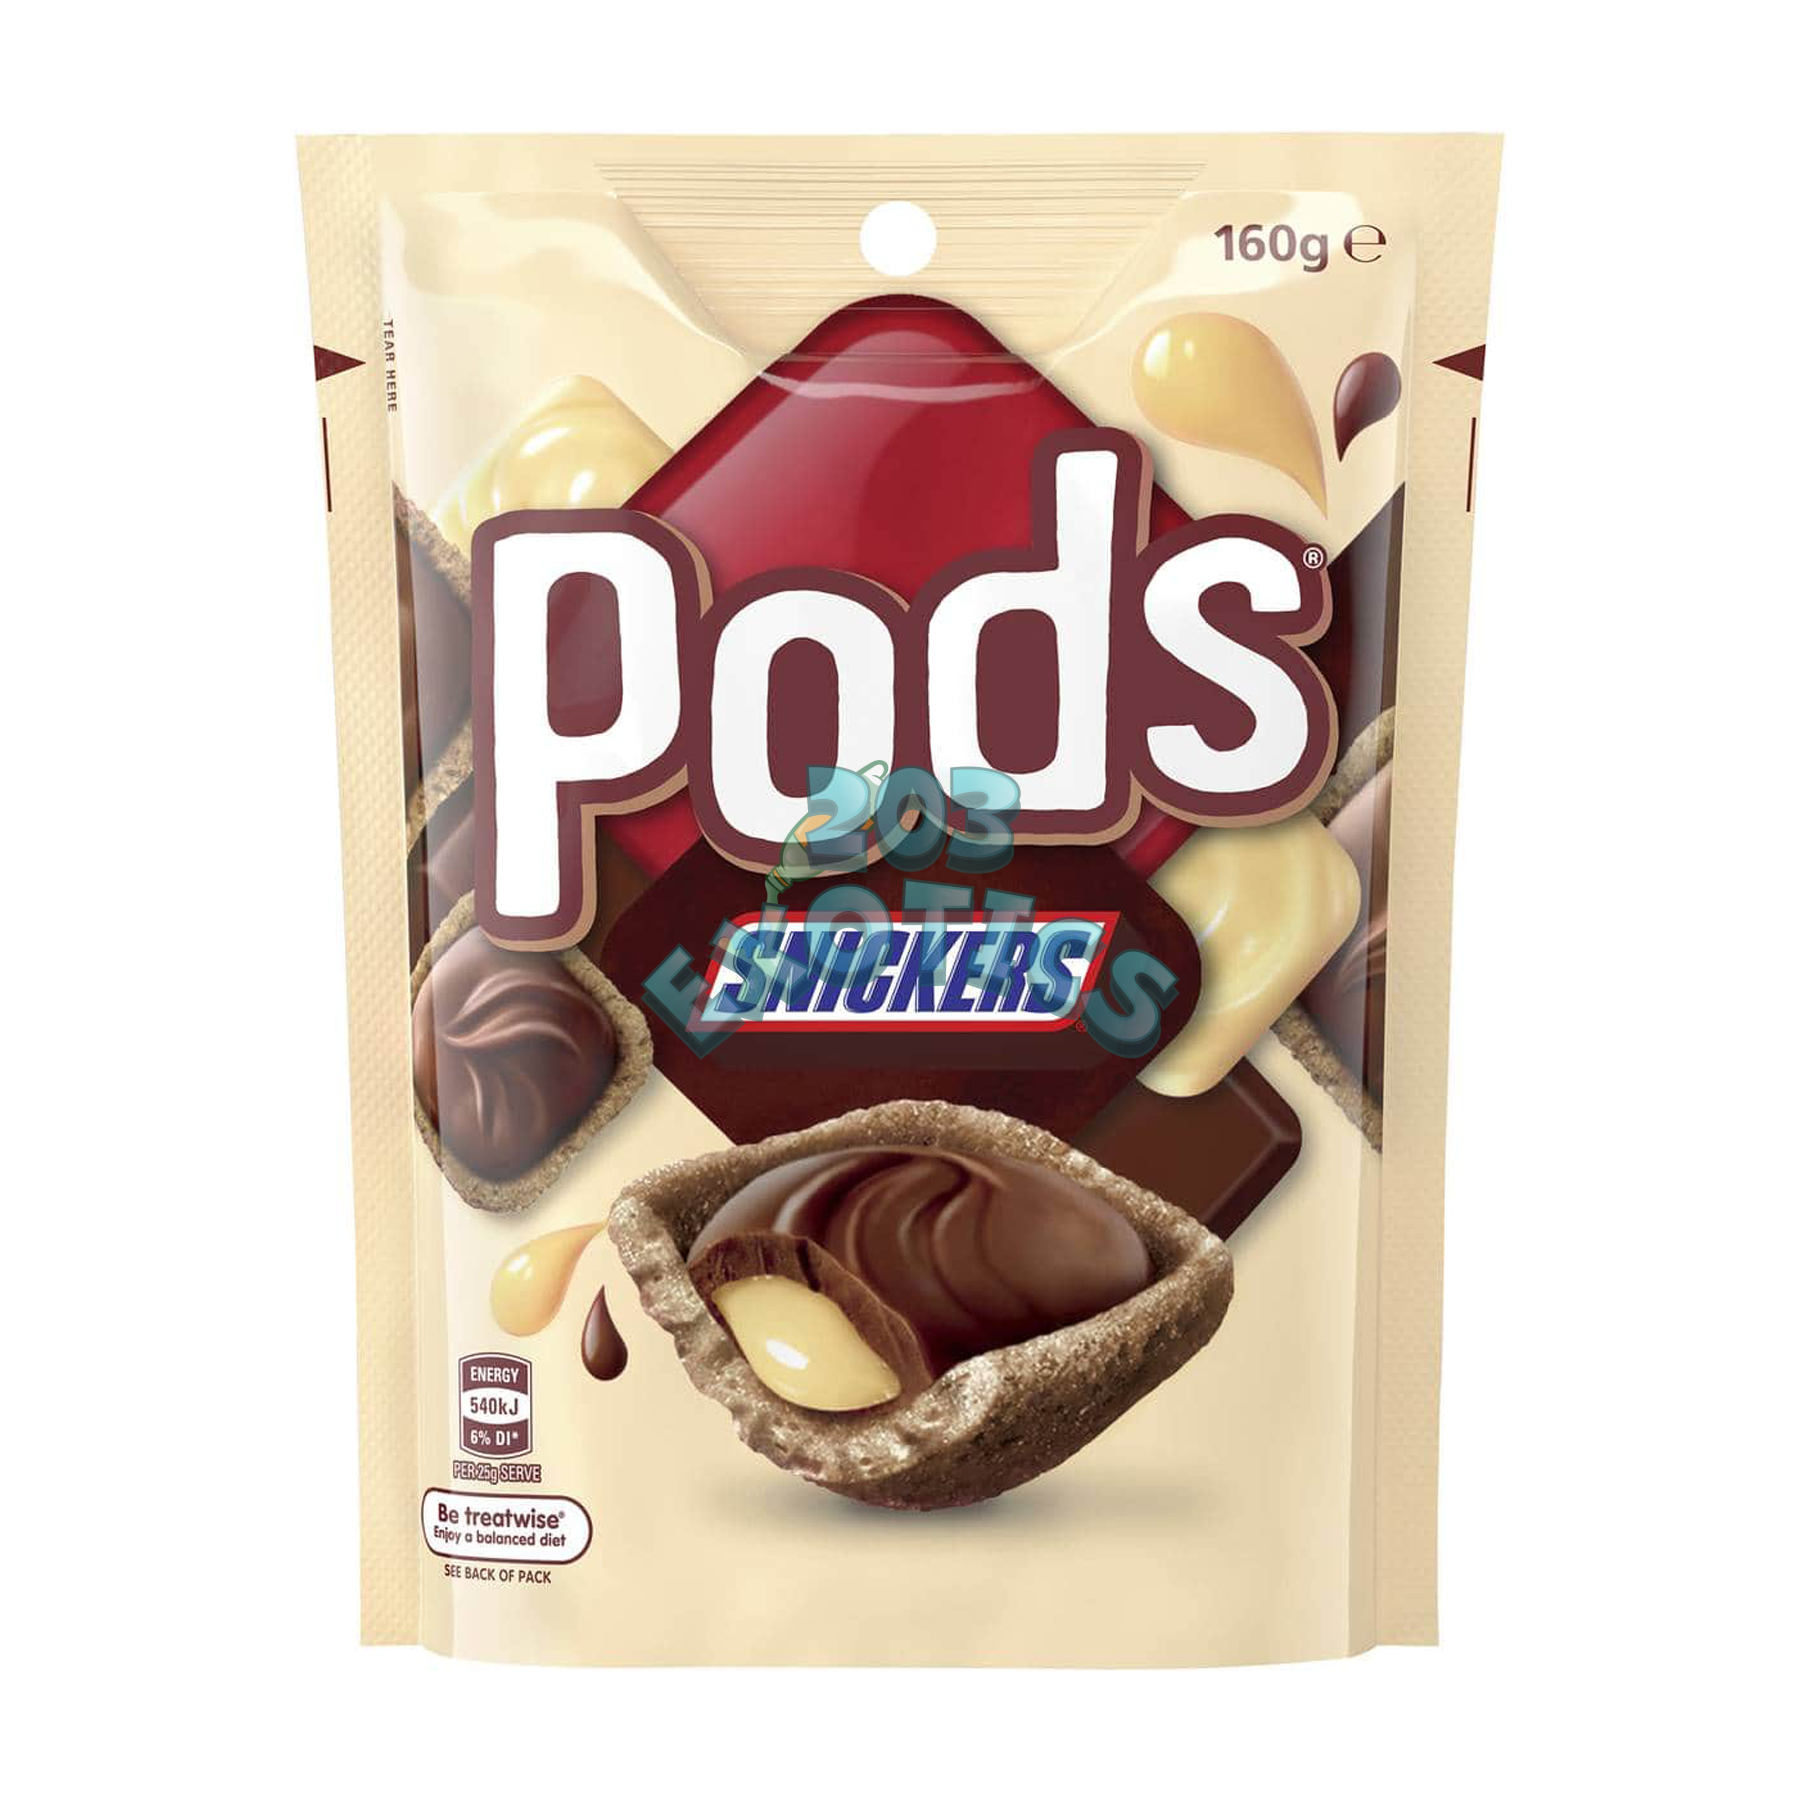 Pods Snickers (160G) Chocolate